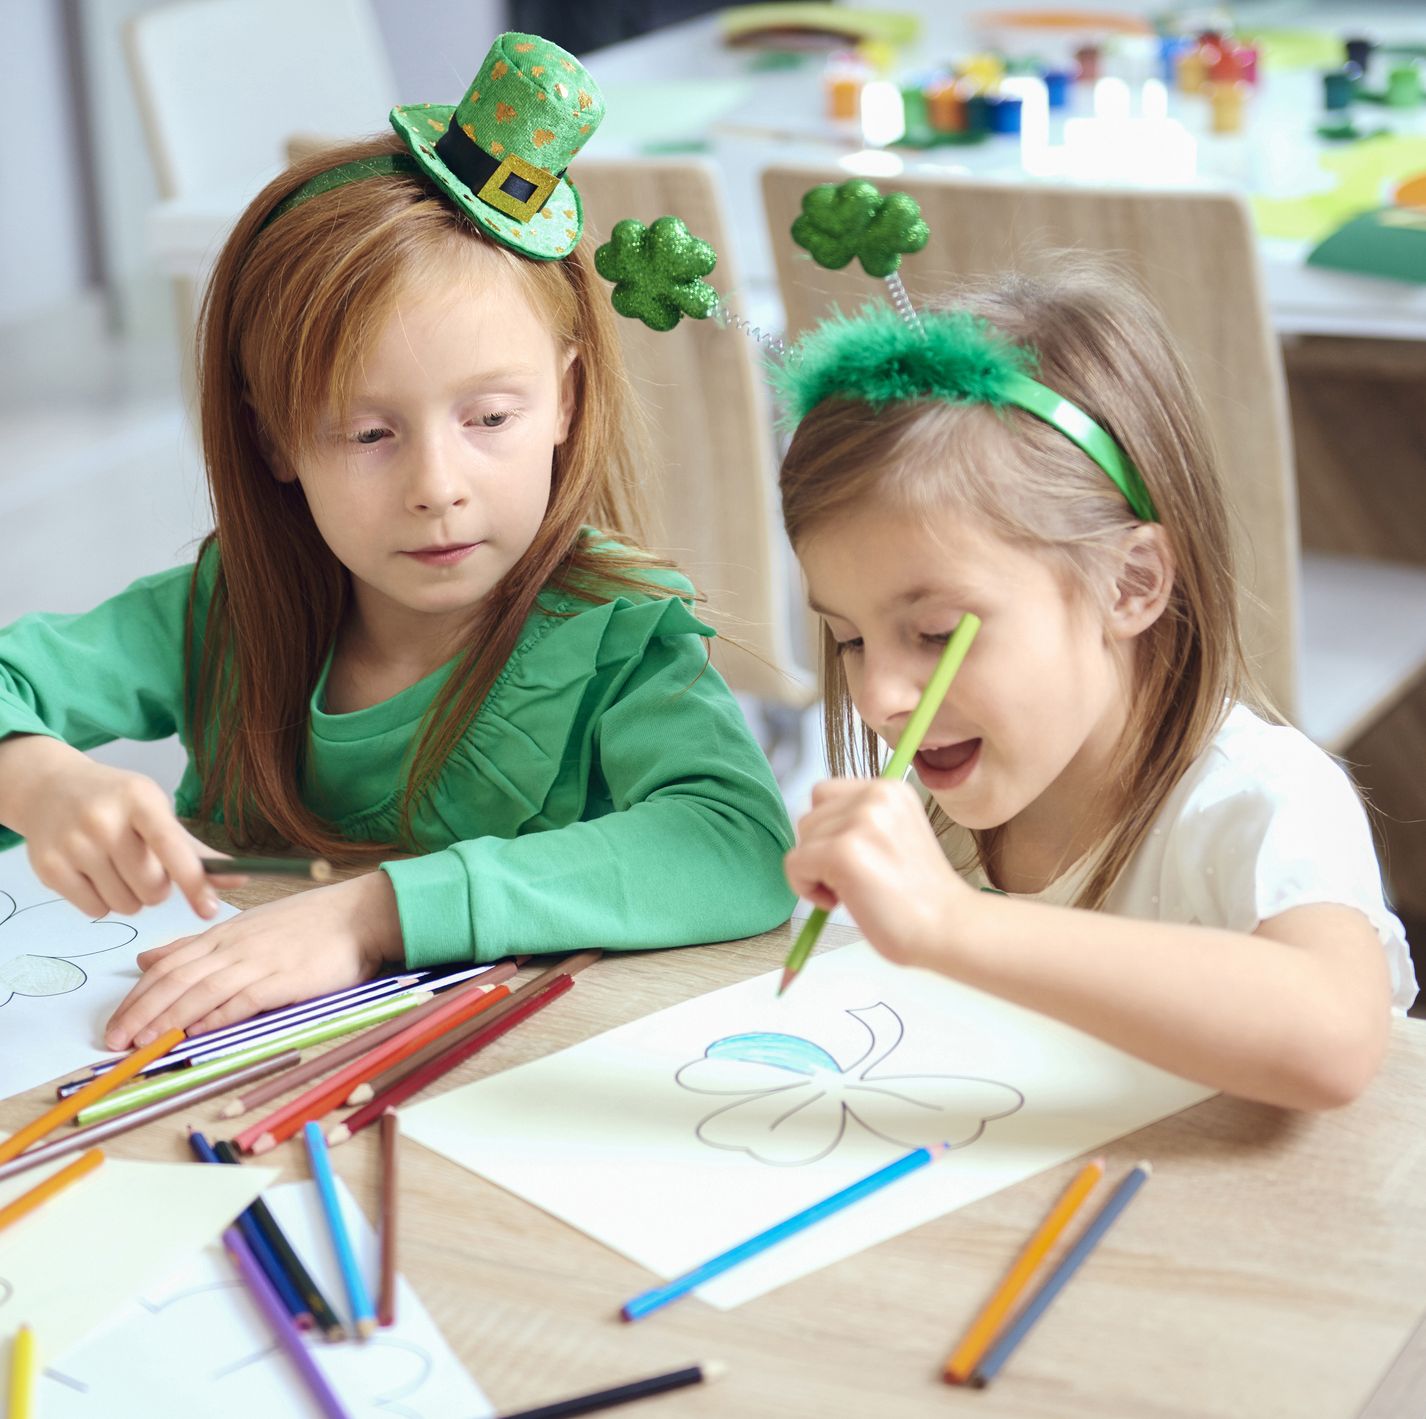 30 Fun and Festive St. Patrick's Day Activities for the Whole Family